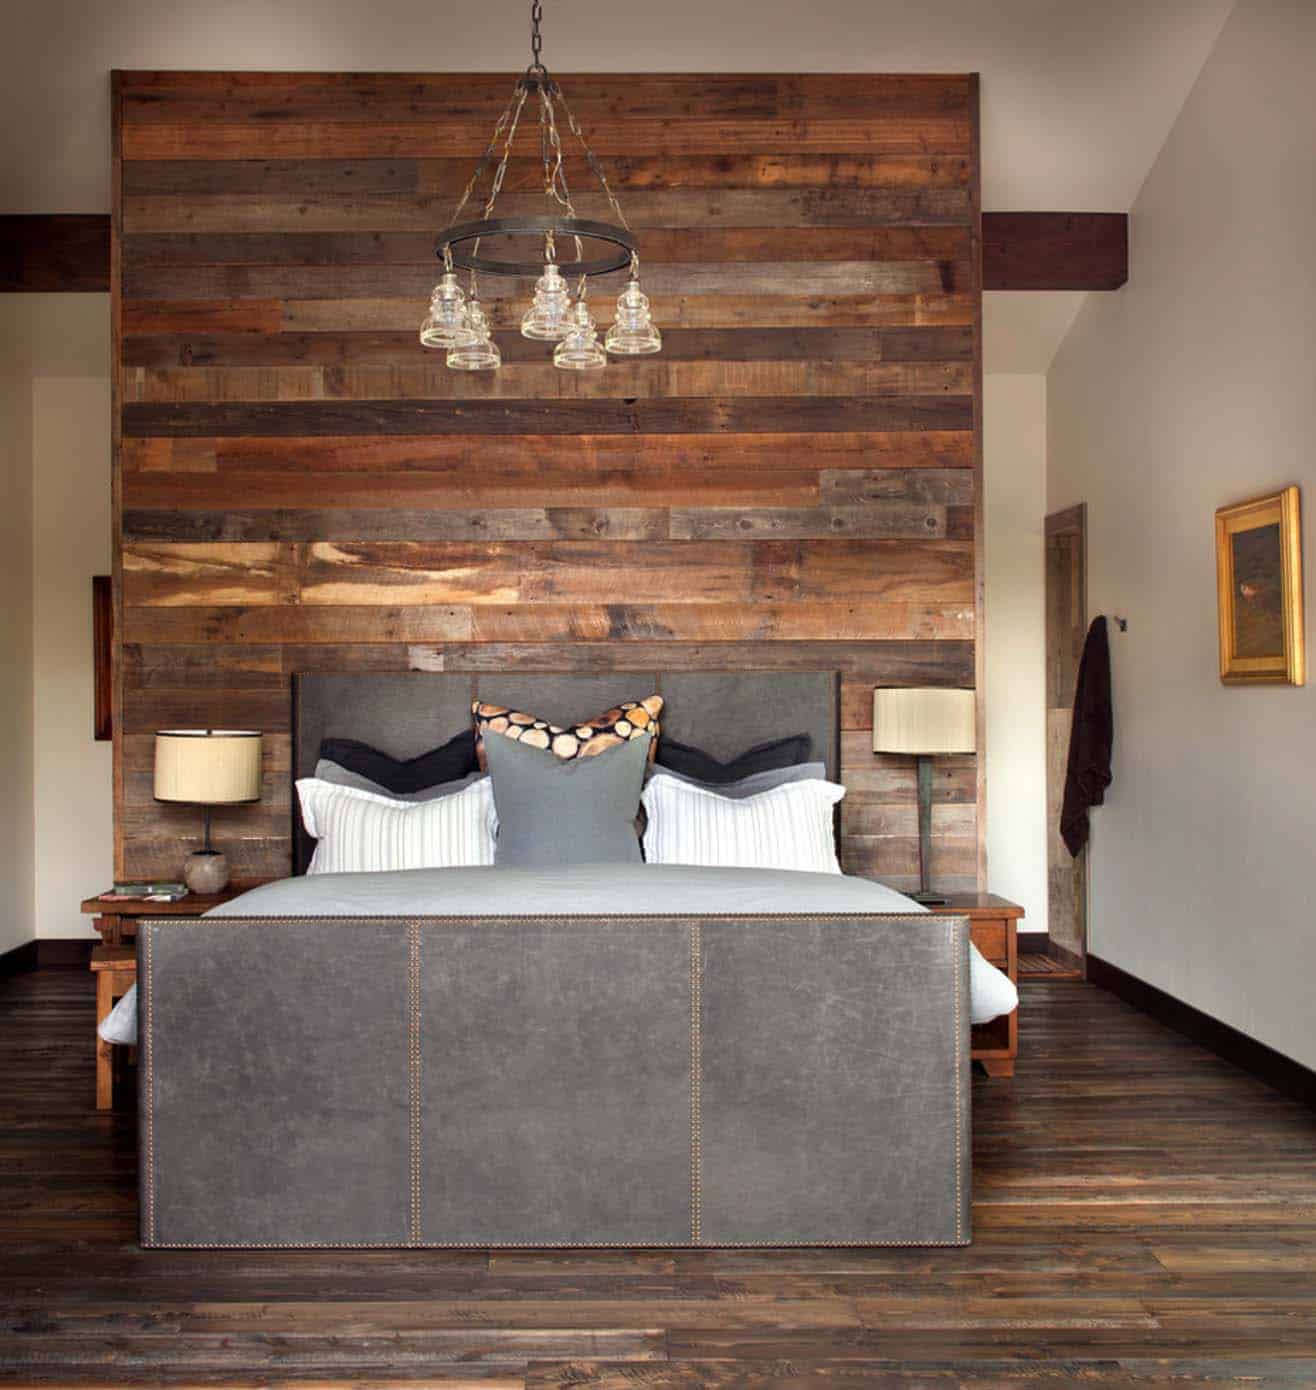 Stone Steel And Sustainability: Modern Materials In Rustic Design